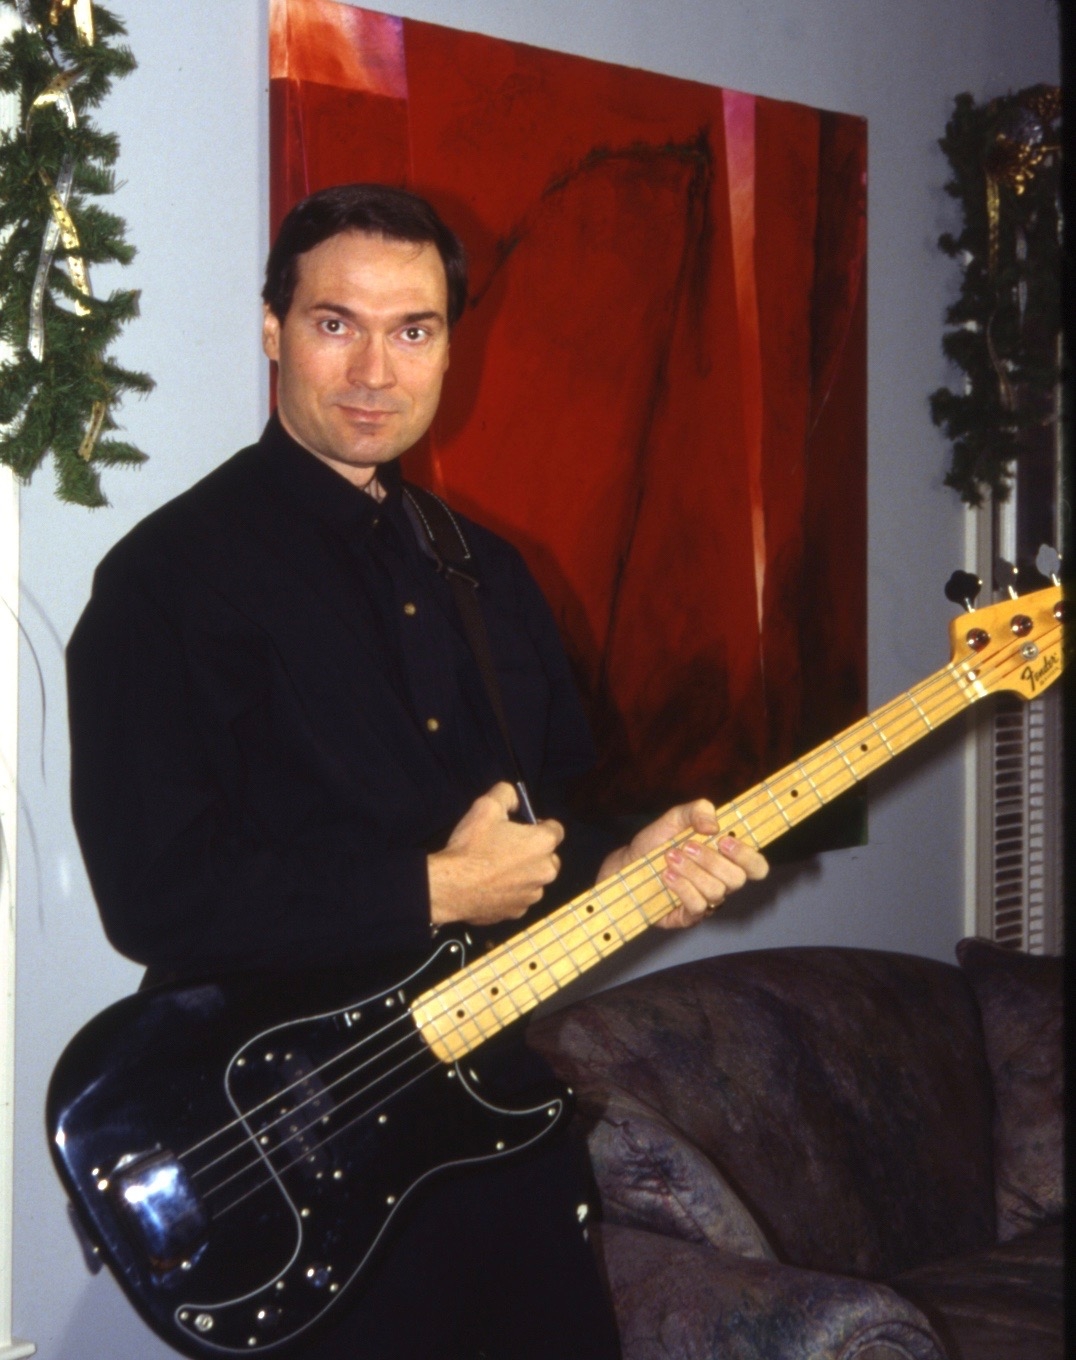 Bill with 1978 Fender Precision Bass